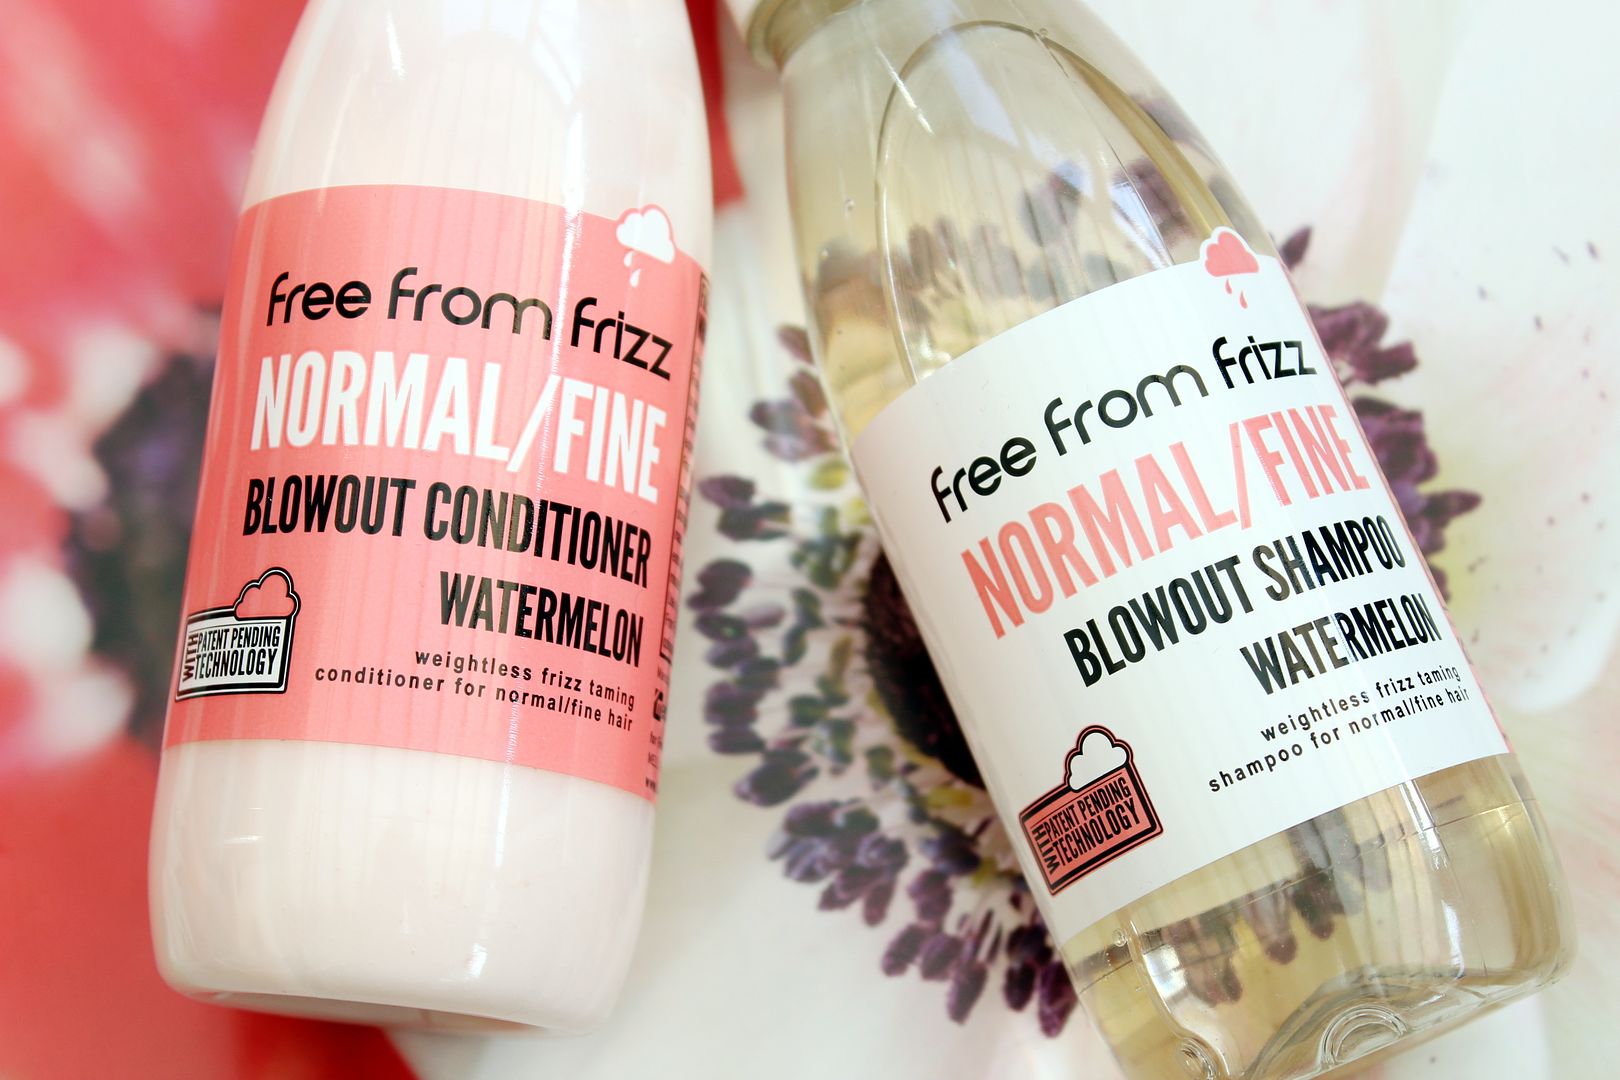 Free From Frizz Blowout Watermelon Shampoo and Conditioner